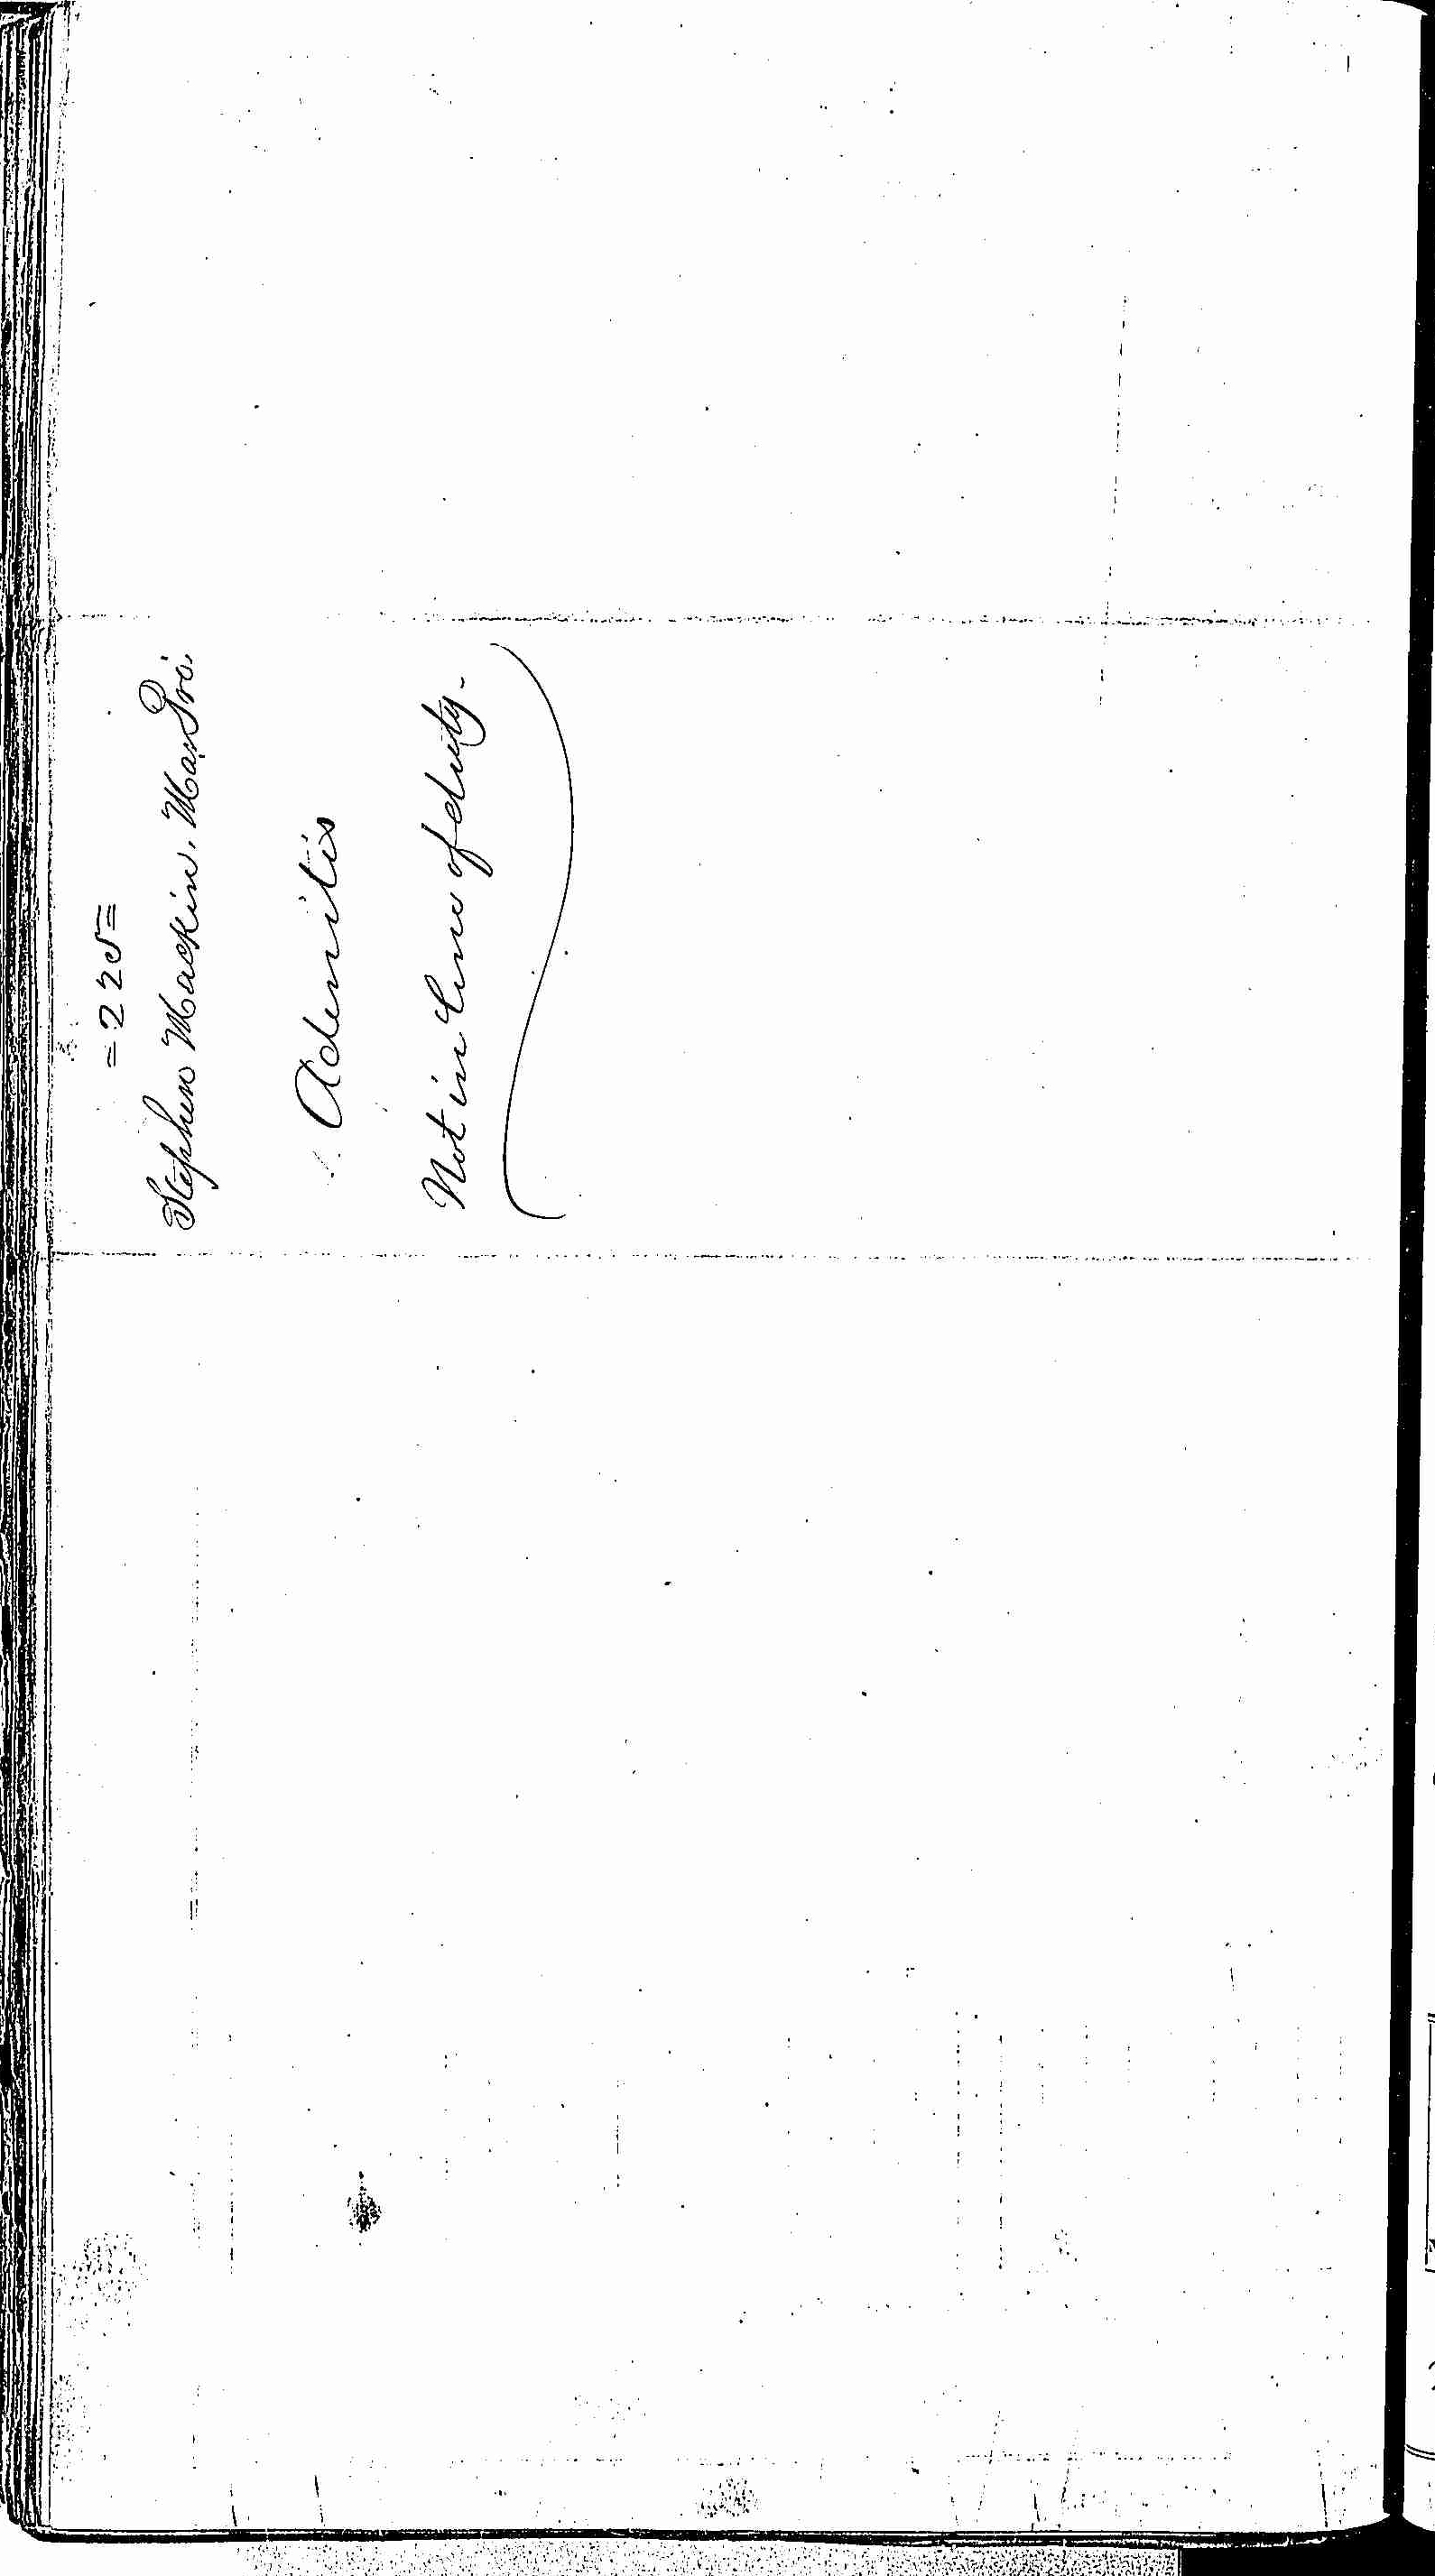 Entry for Stephen Mackin (page 2 of 2) in the log Hospital Tickets and Case Papers - Naval Hospital - Washington, D.C. - 1866-68